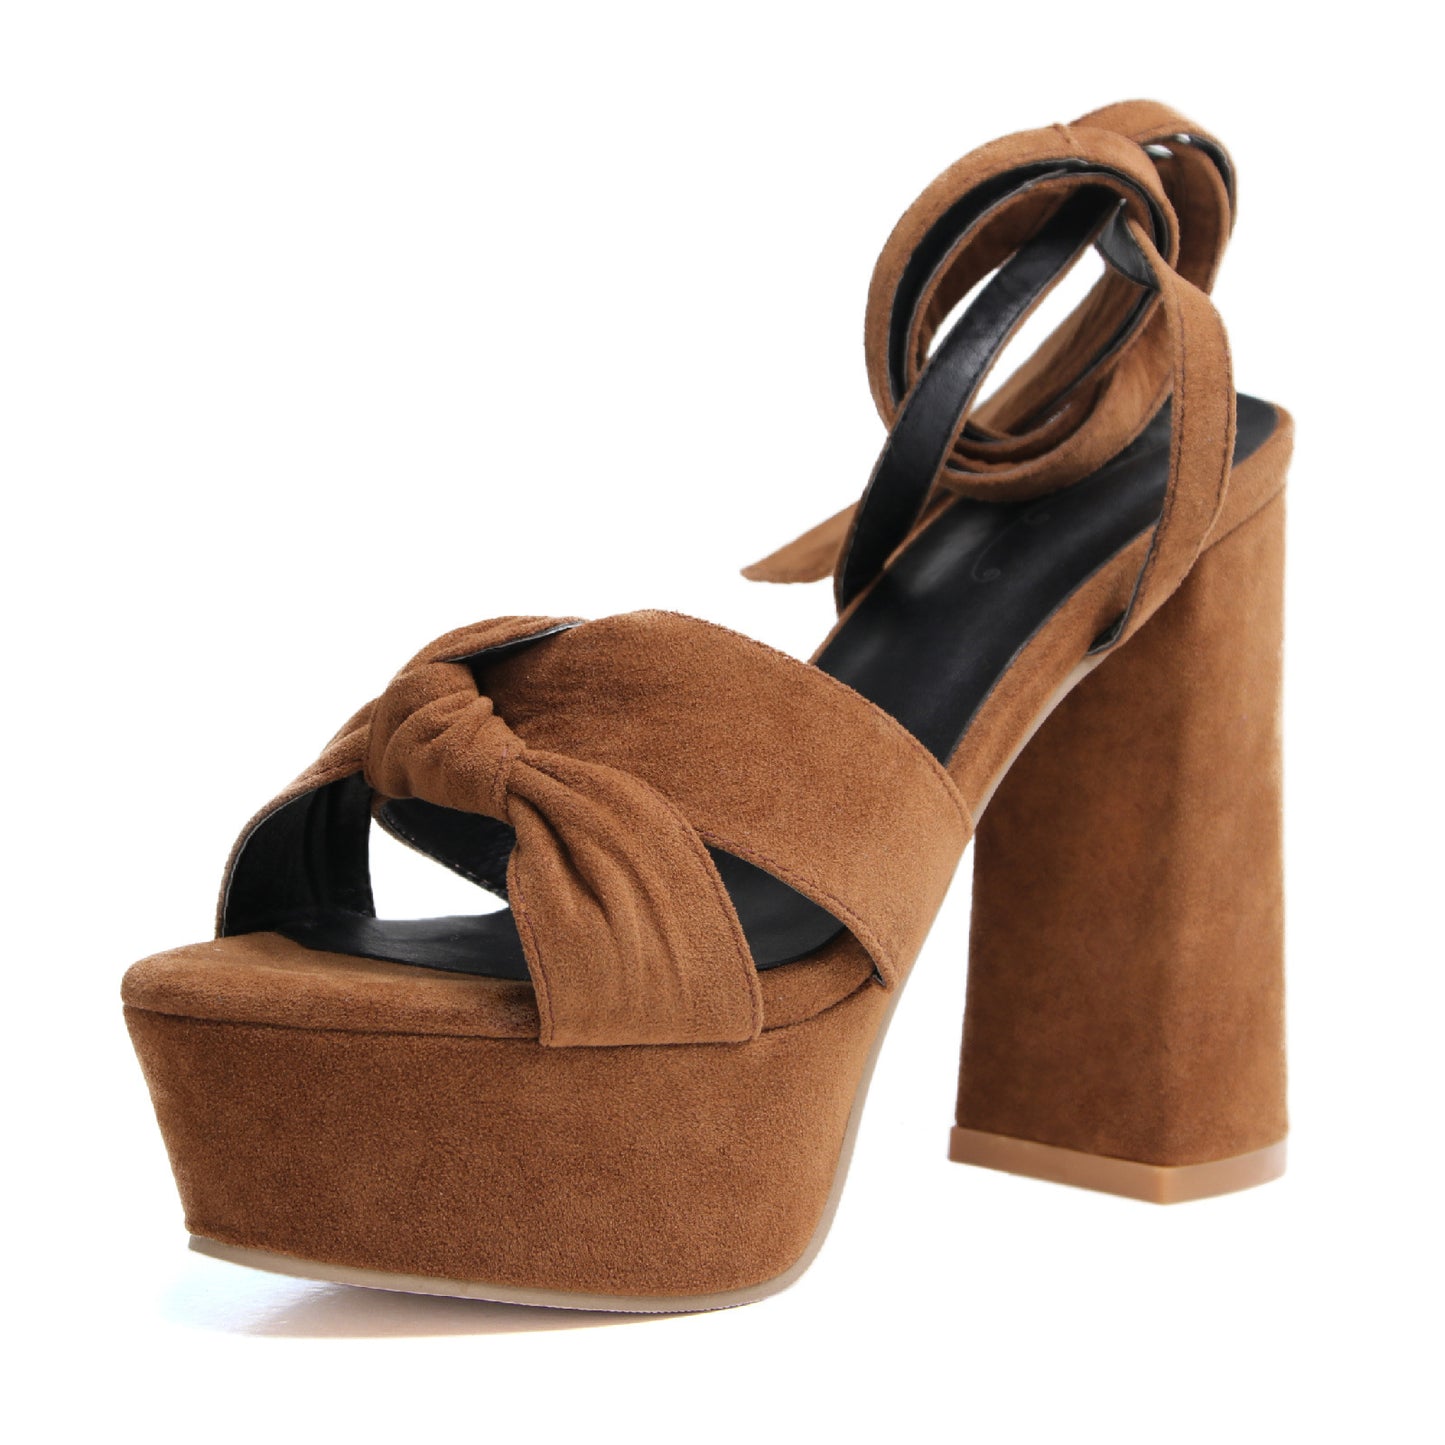 New Round Toe High Chunky Heel Ankle Strap Ladies Sandals